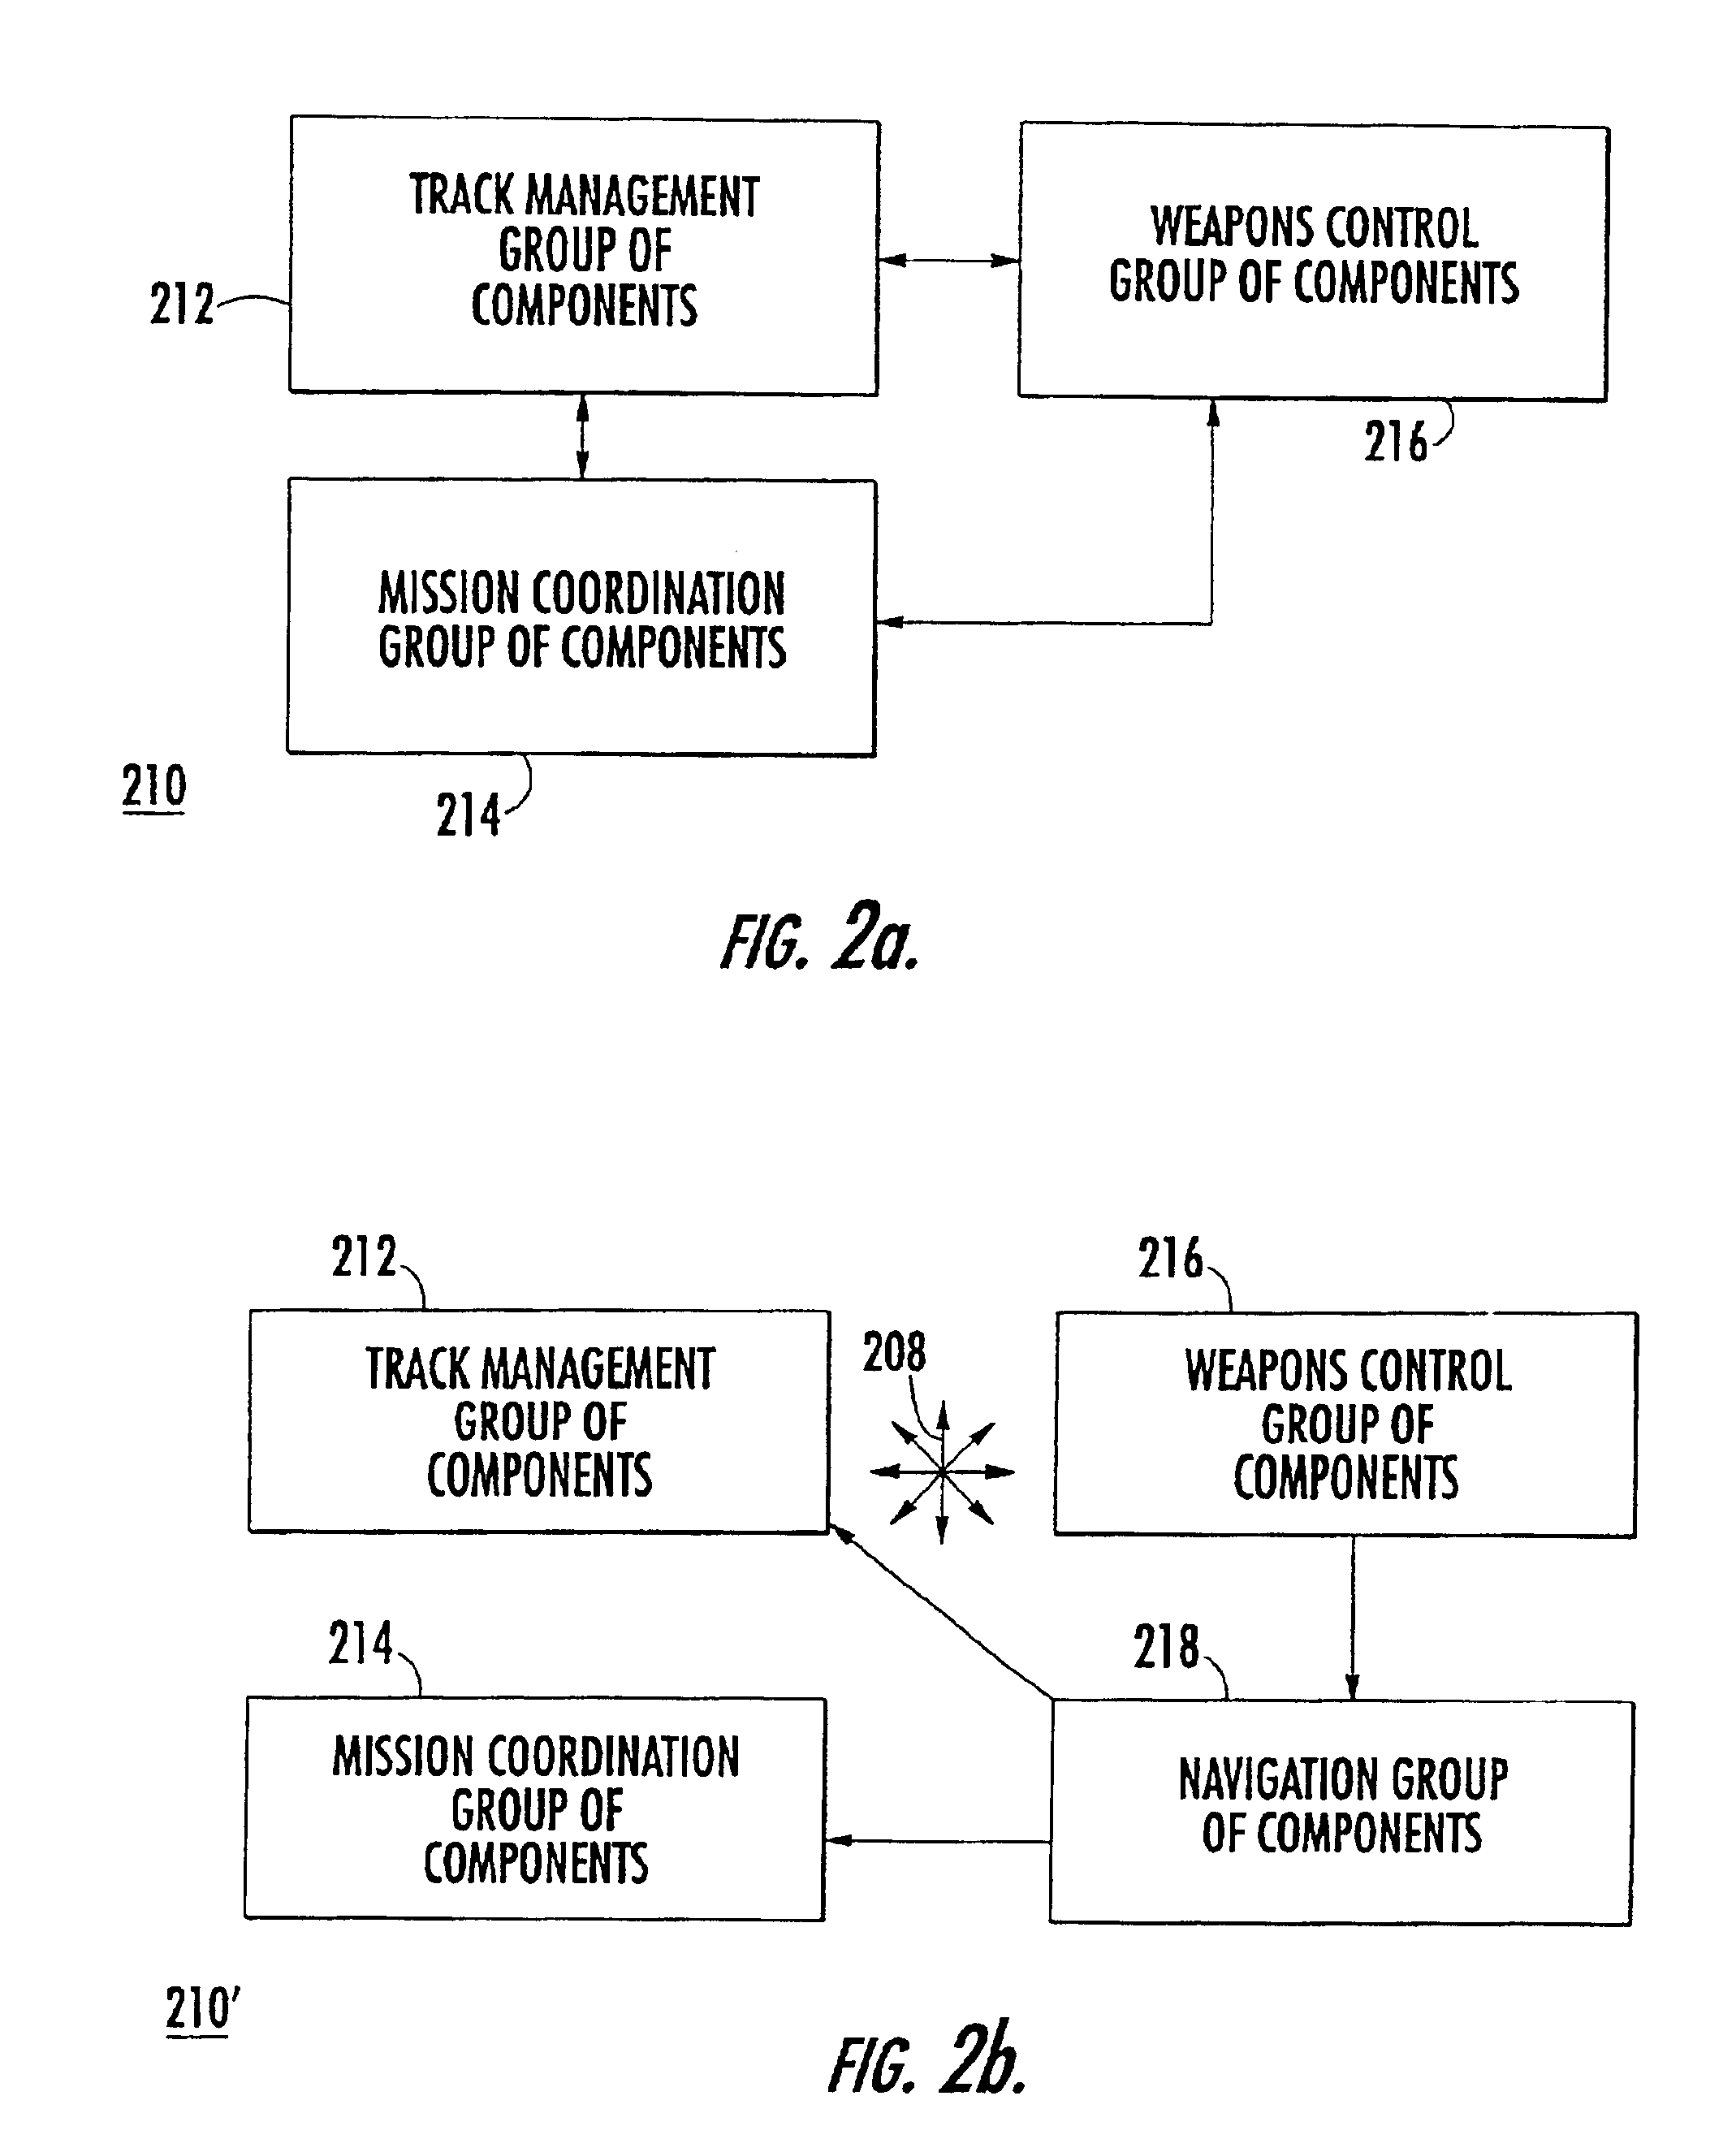 Command and control system architecture for convenient upgrading